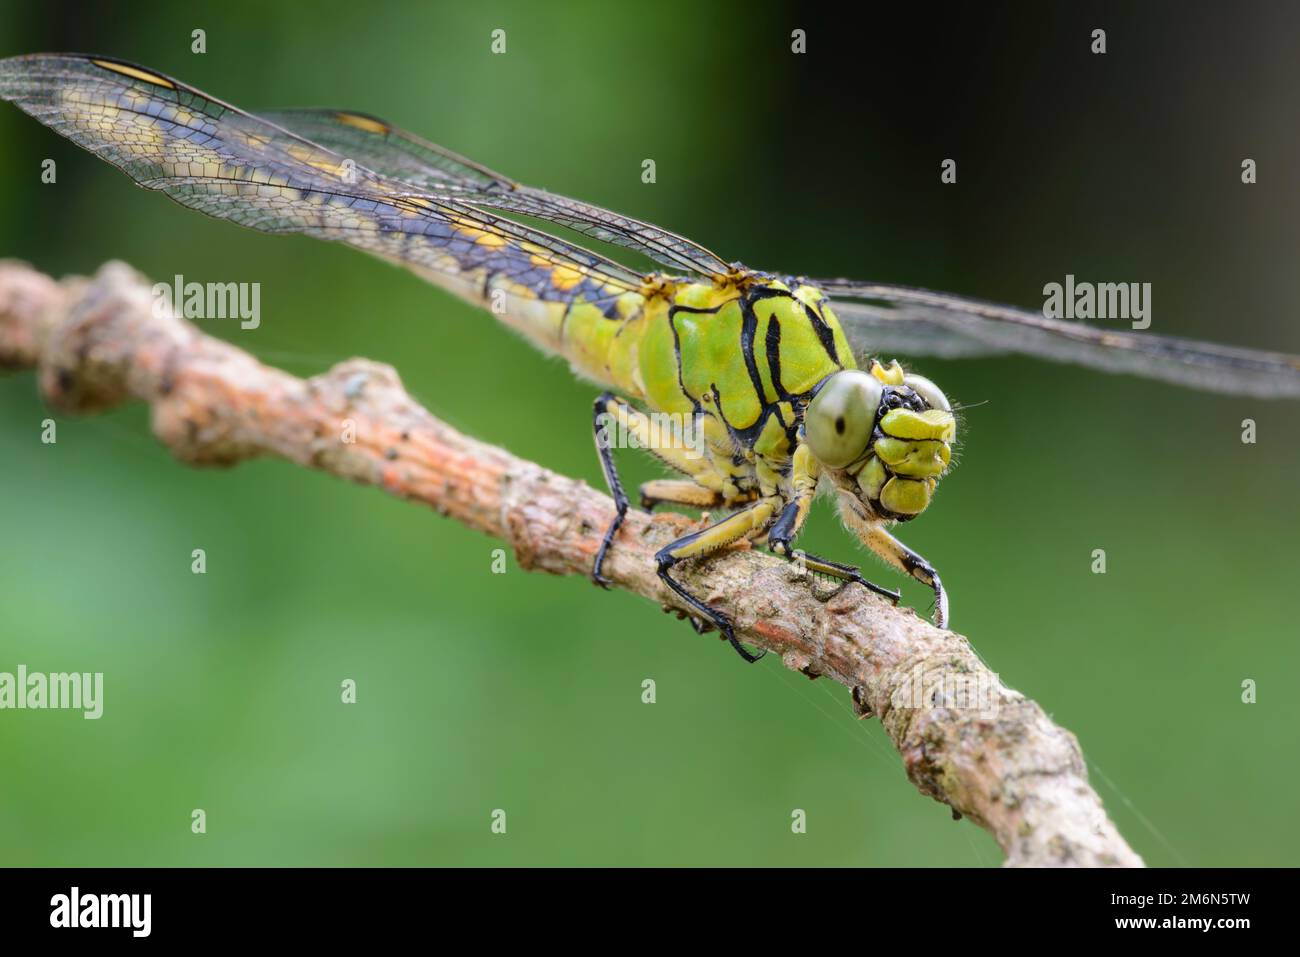 Lime green snake barbless - Dragonflies